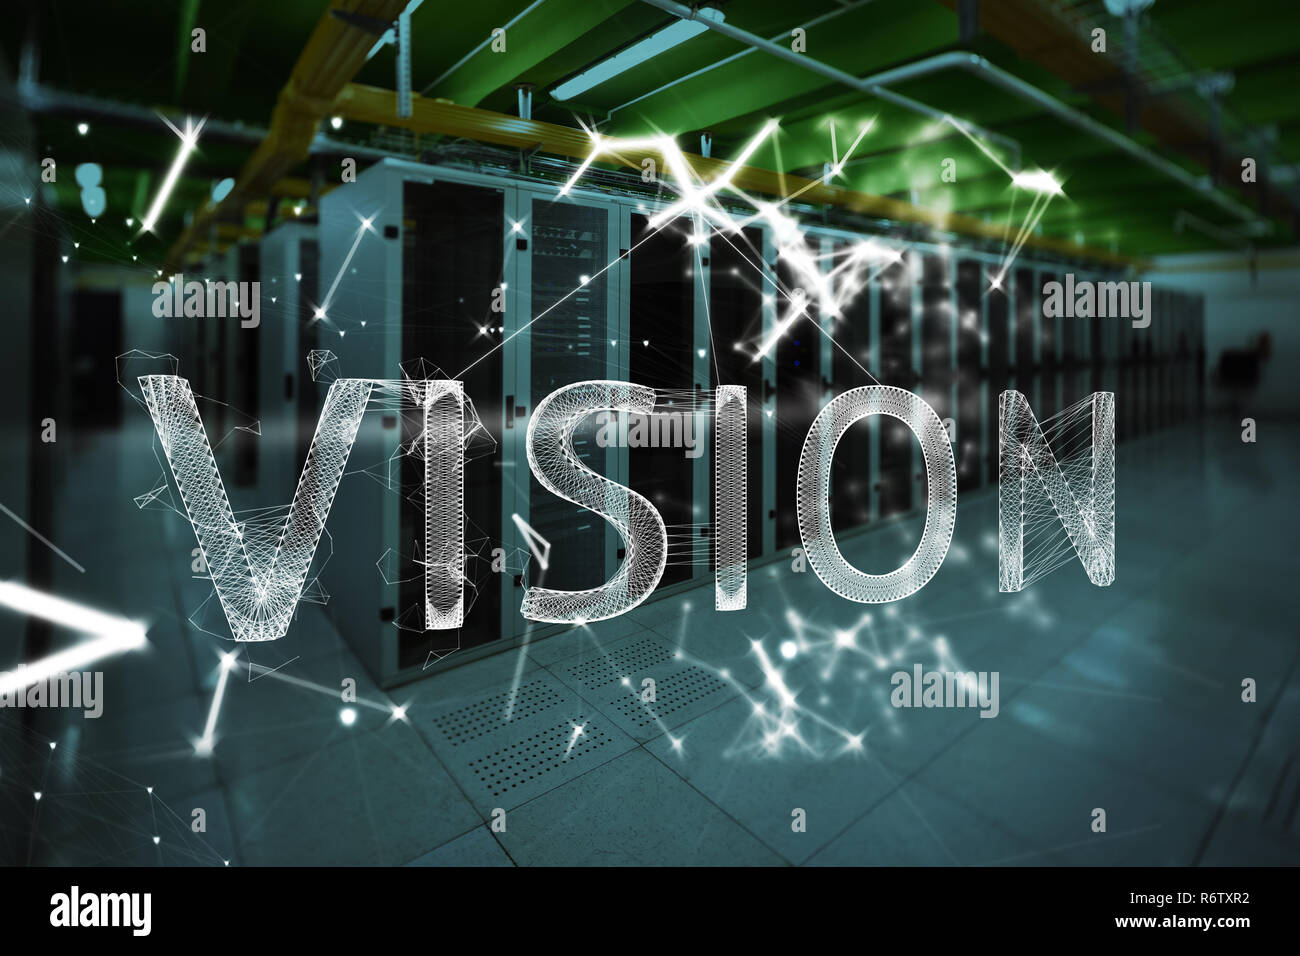 Vision text on black background against empty server room Stock Photo